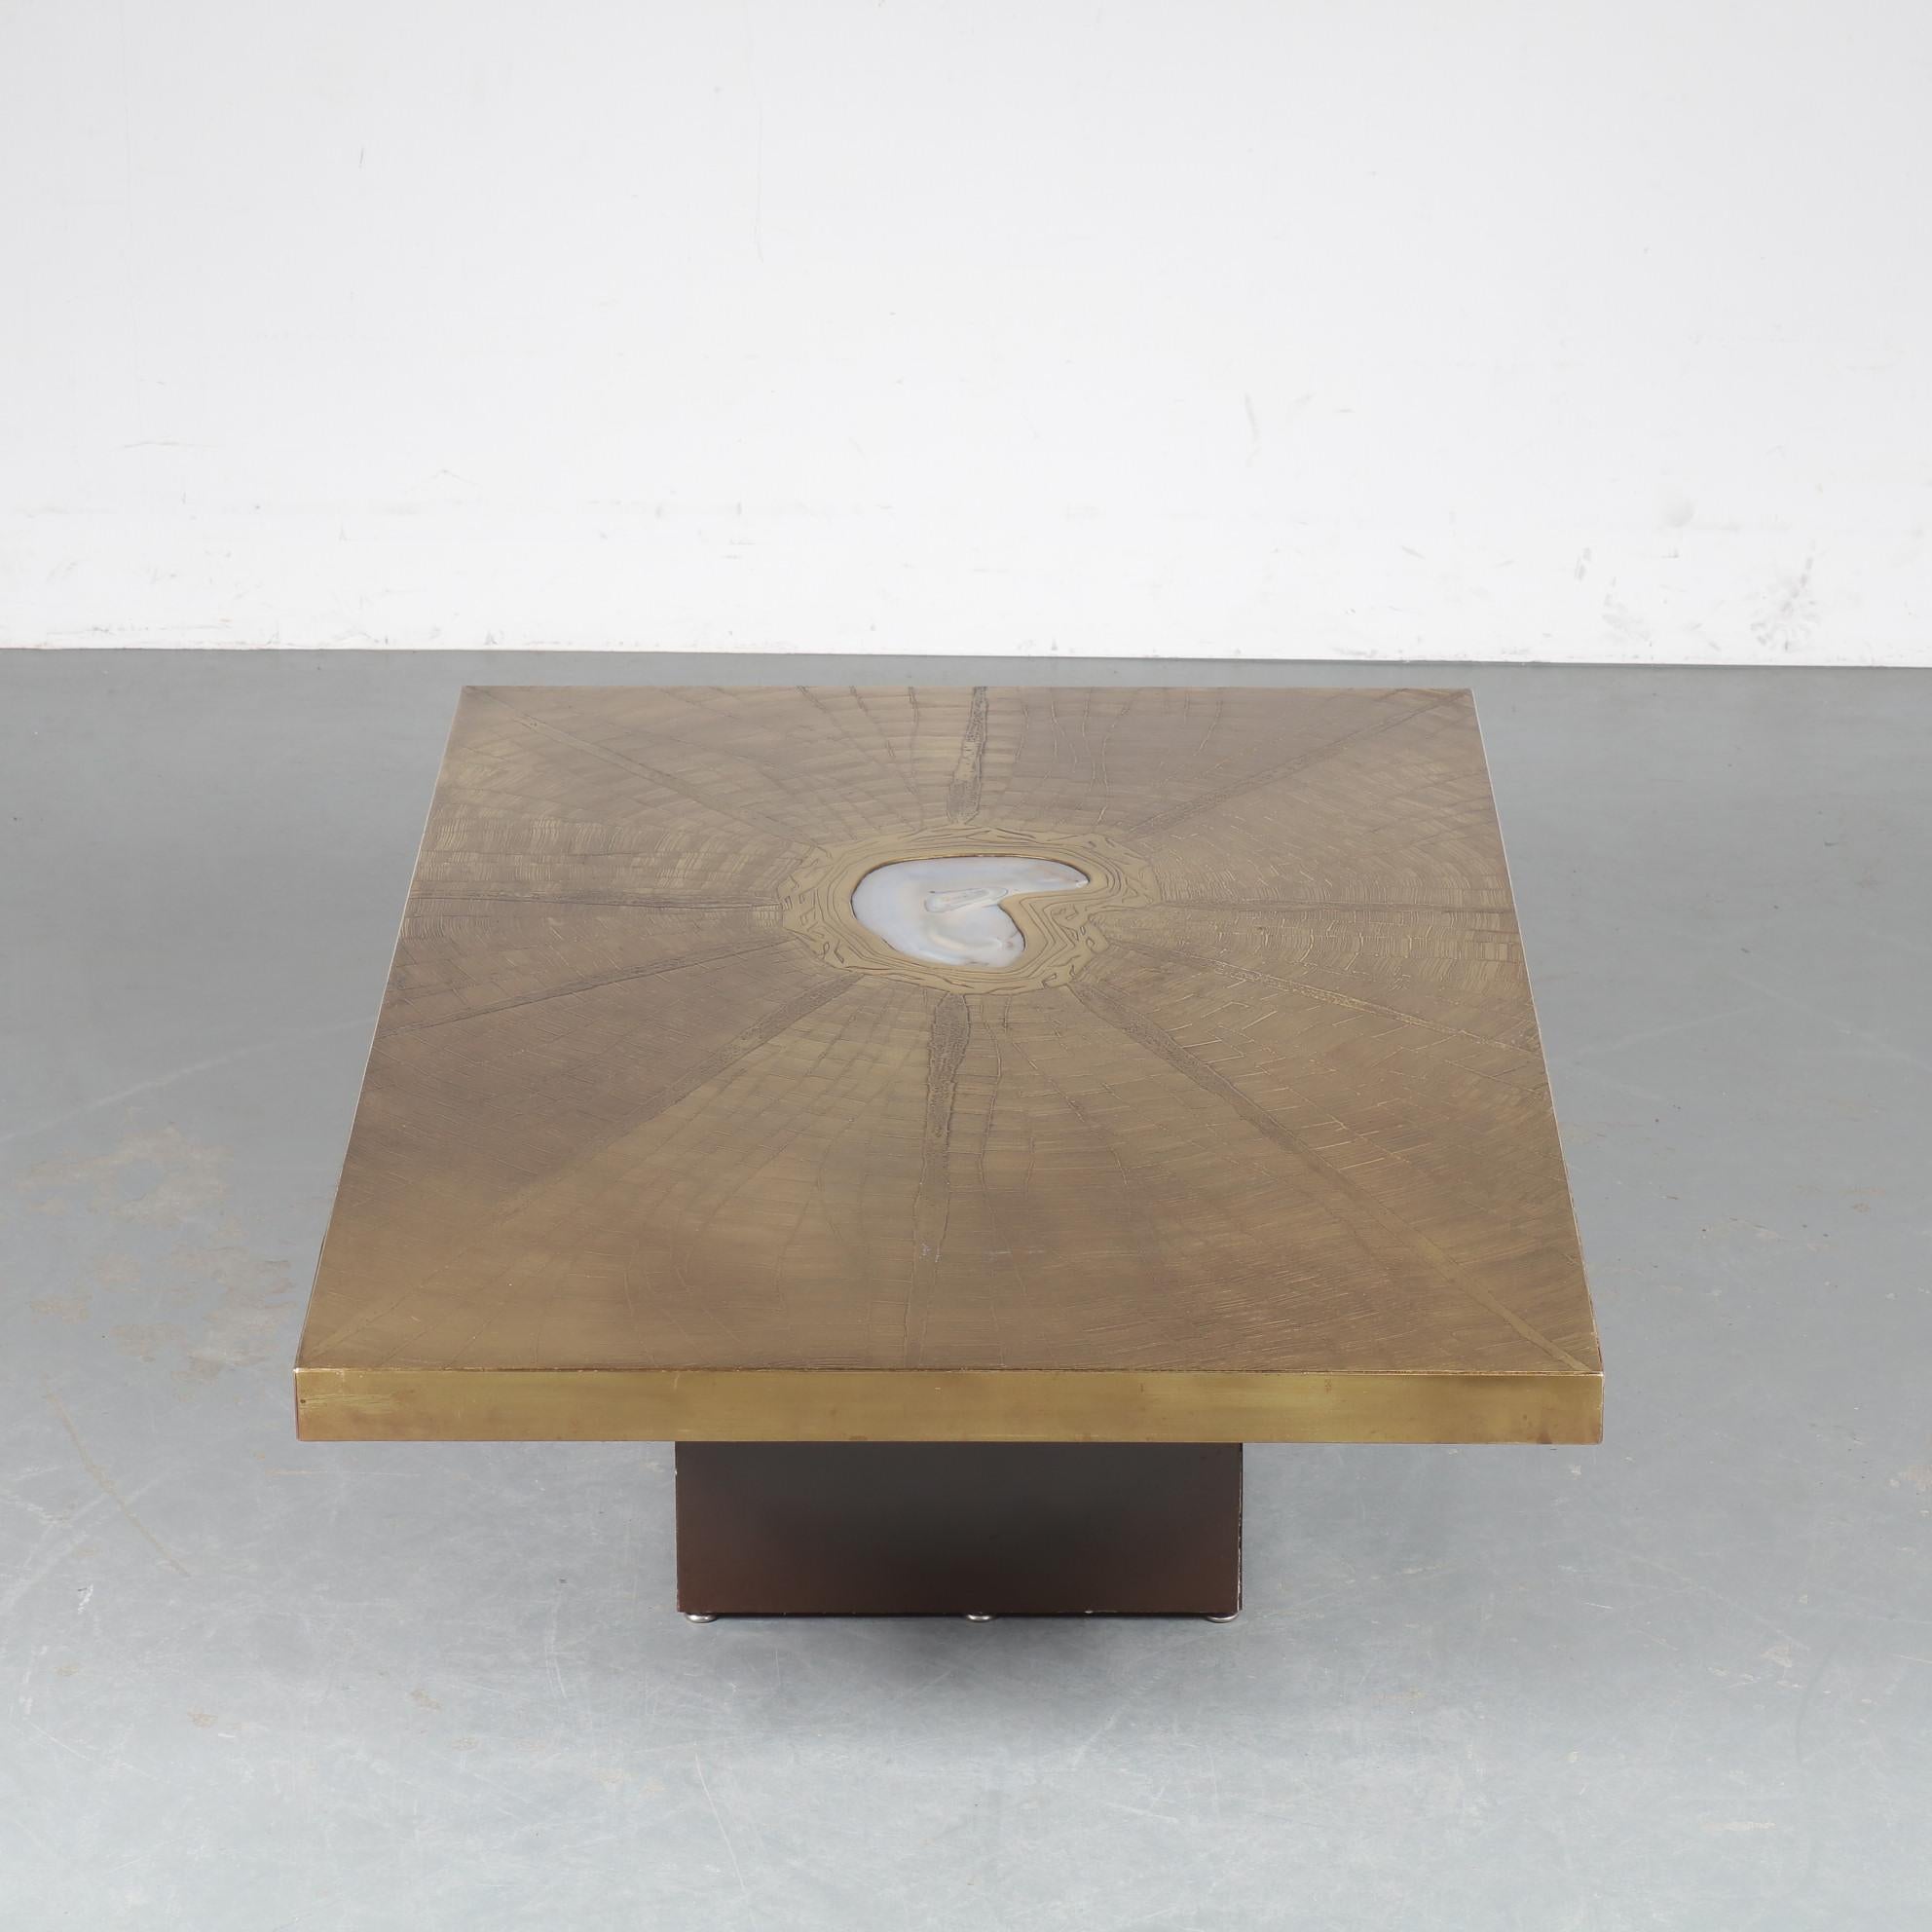 Late 20th Century Brass Coffee Table by Paco Rabanne for Lova Creation, Belgium 1970